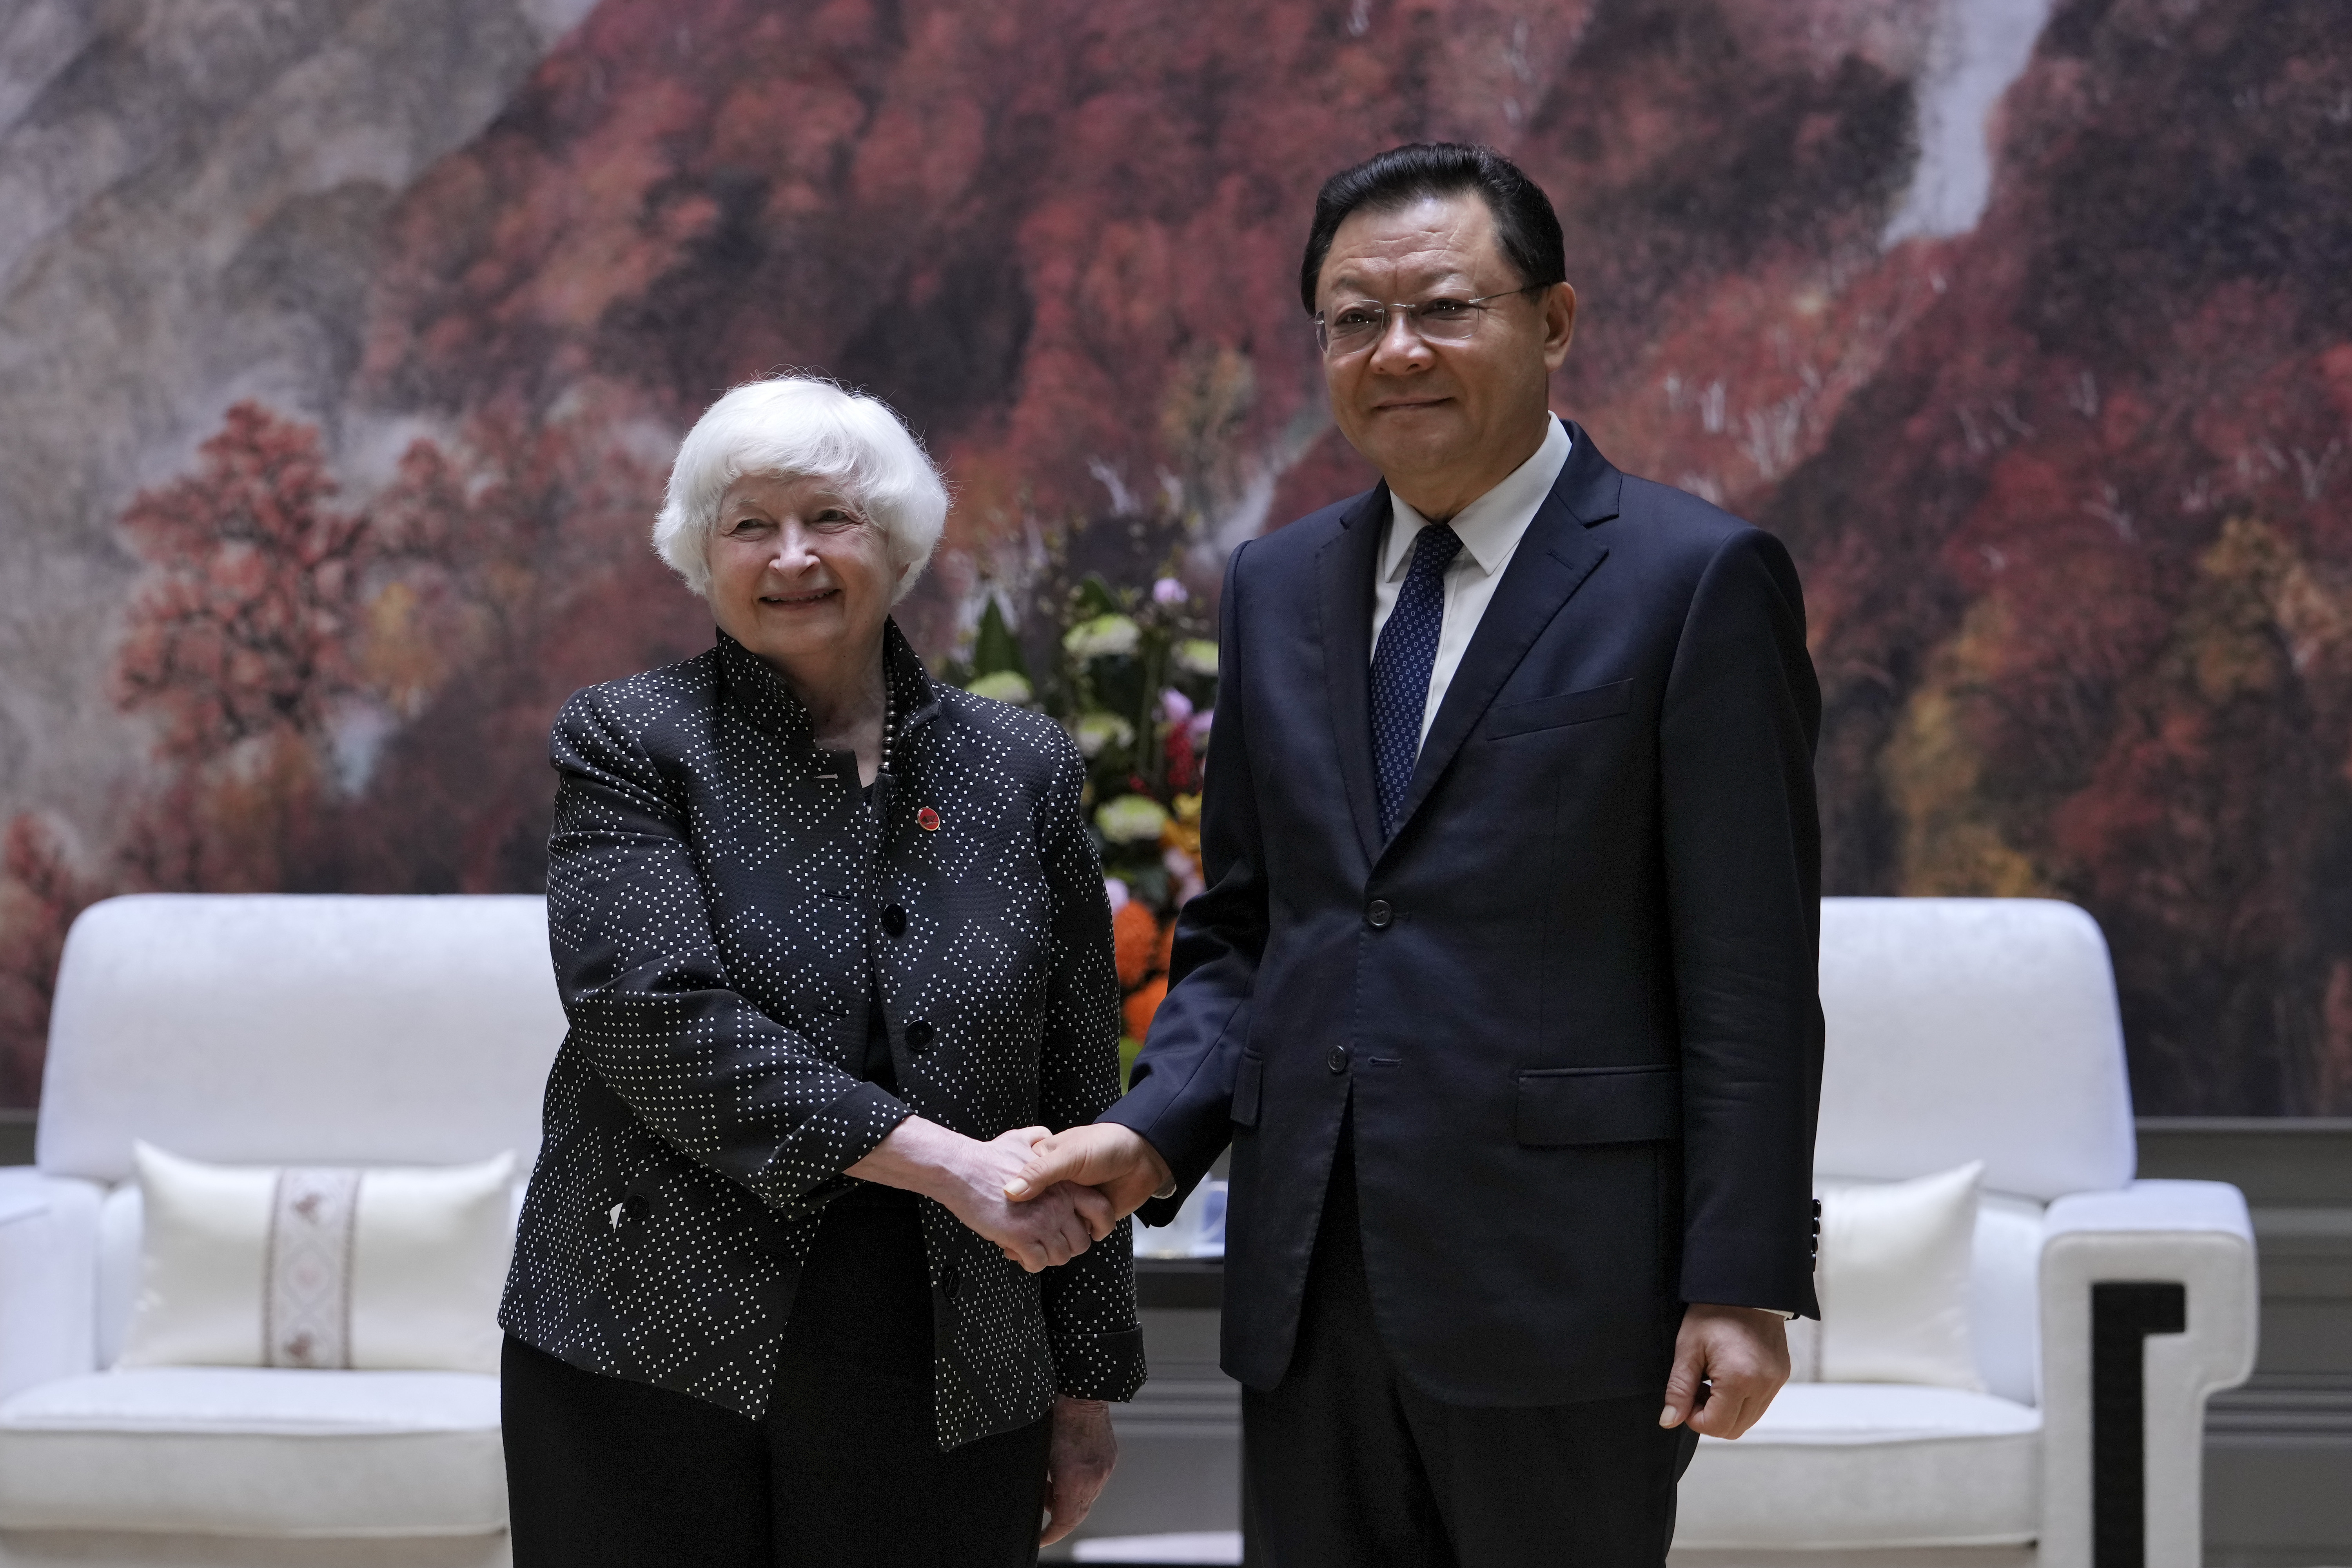 Yellen calls for level playing field for US workers and firms during
China visit